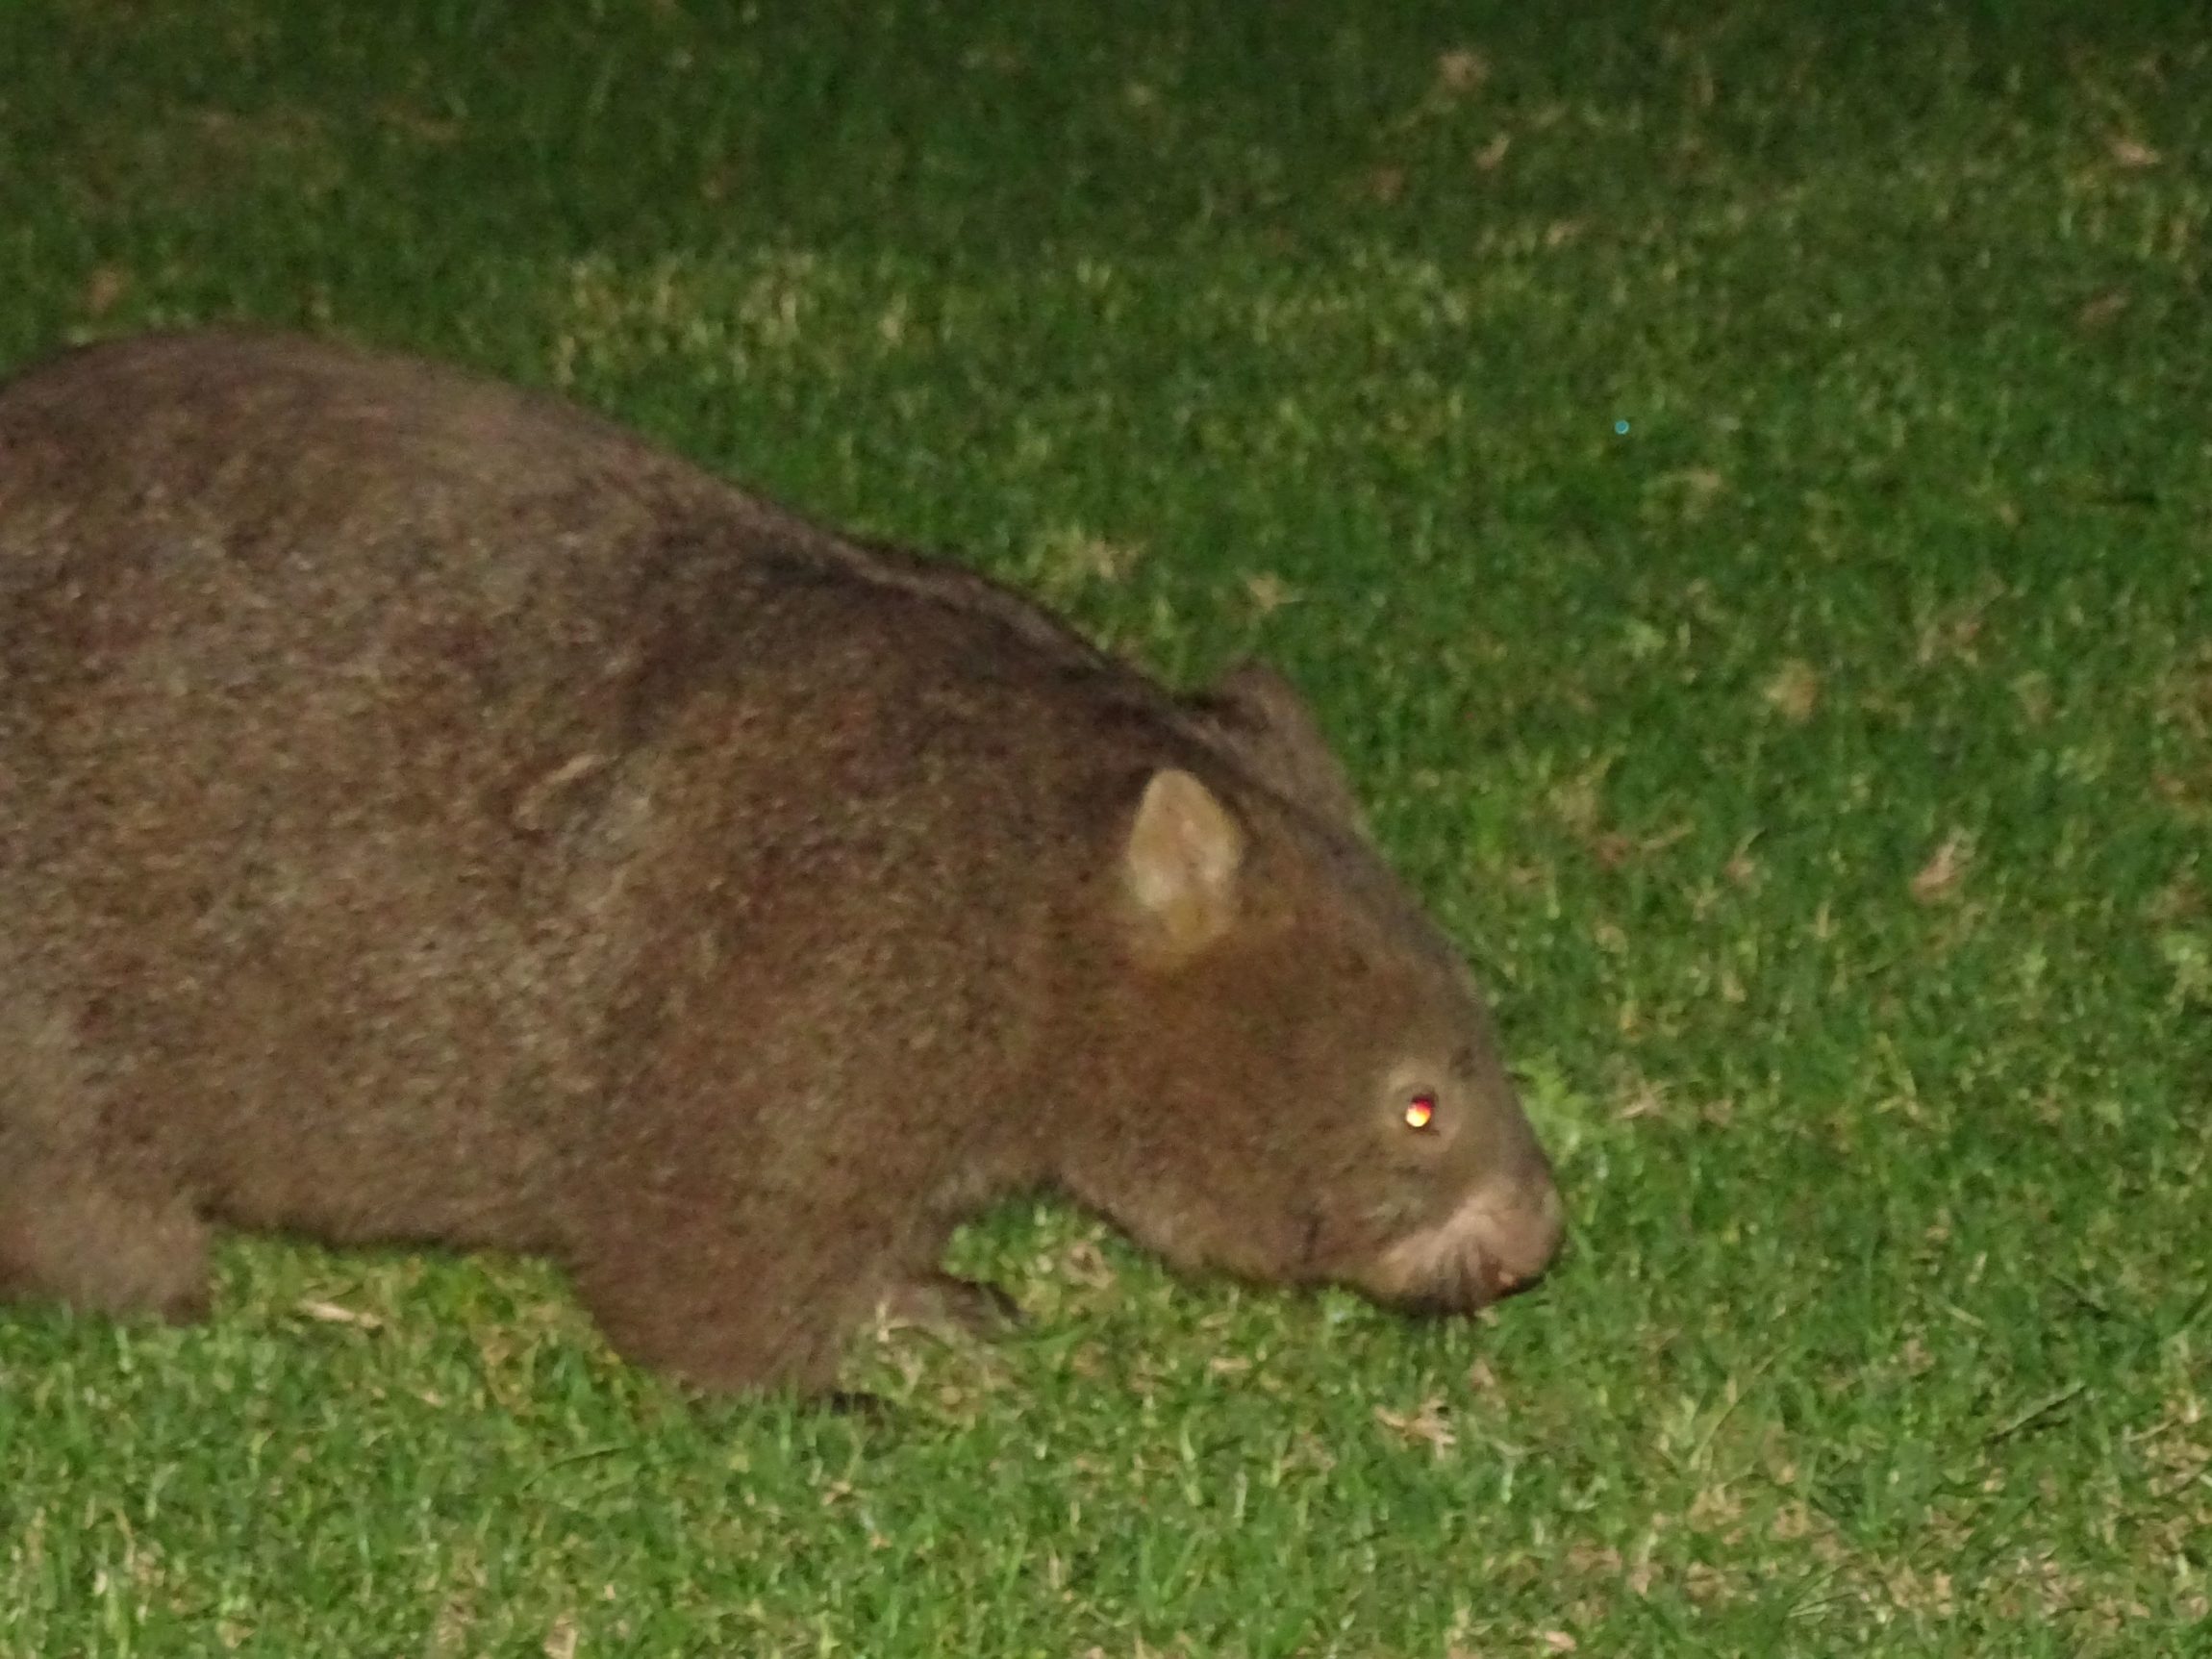 Wombat (This picture is taken with the help of my friend David)